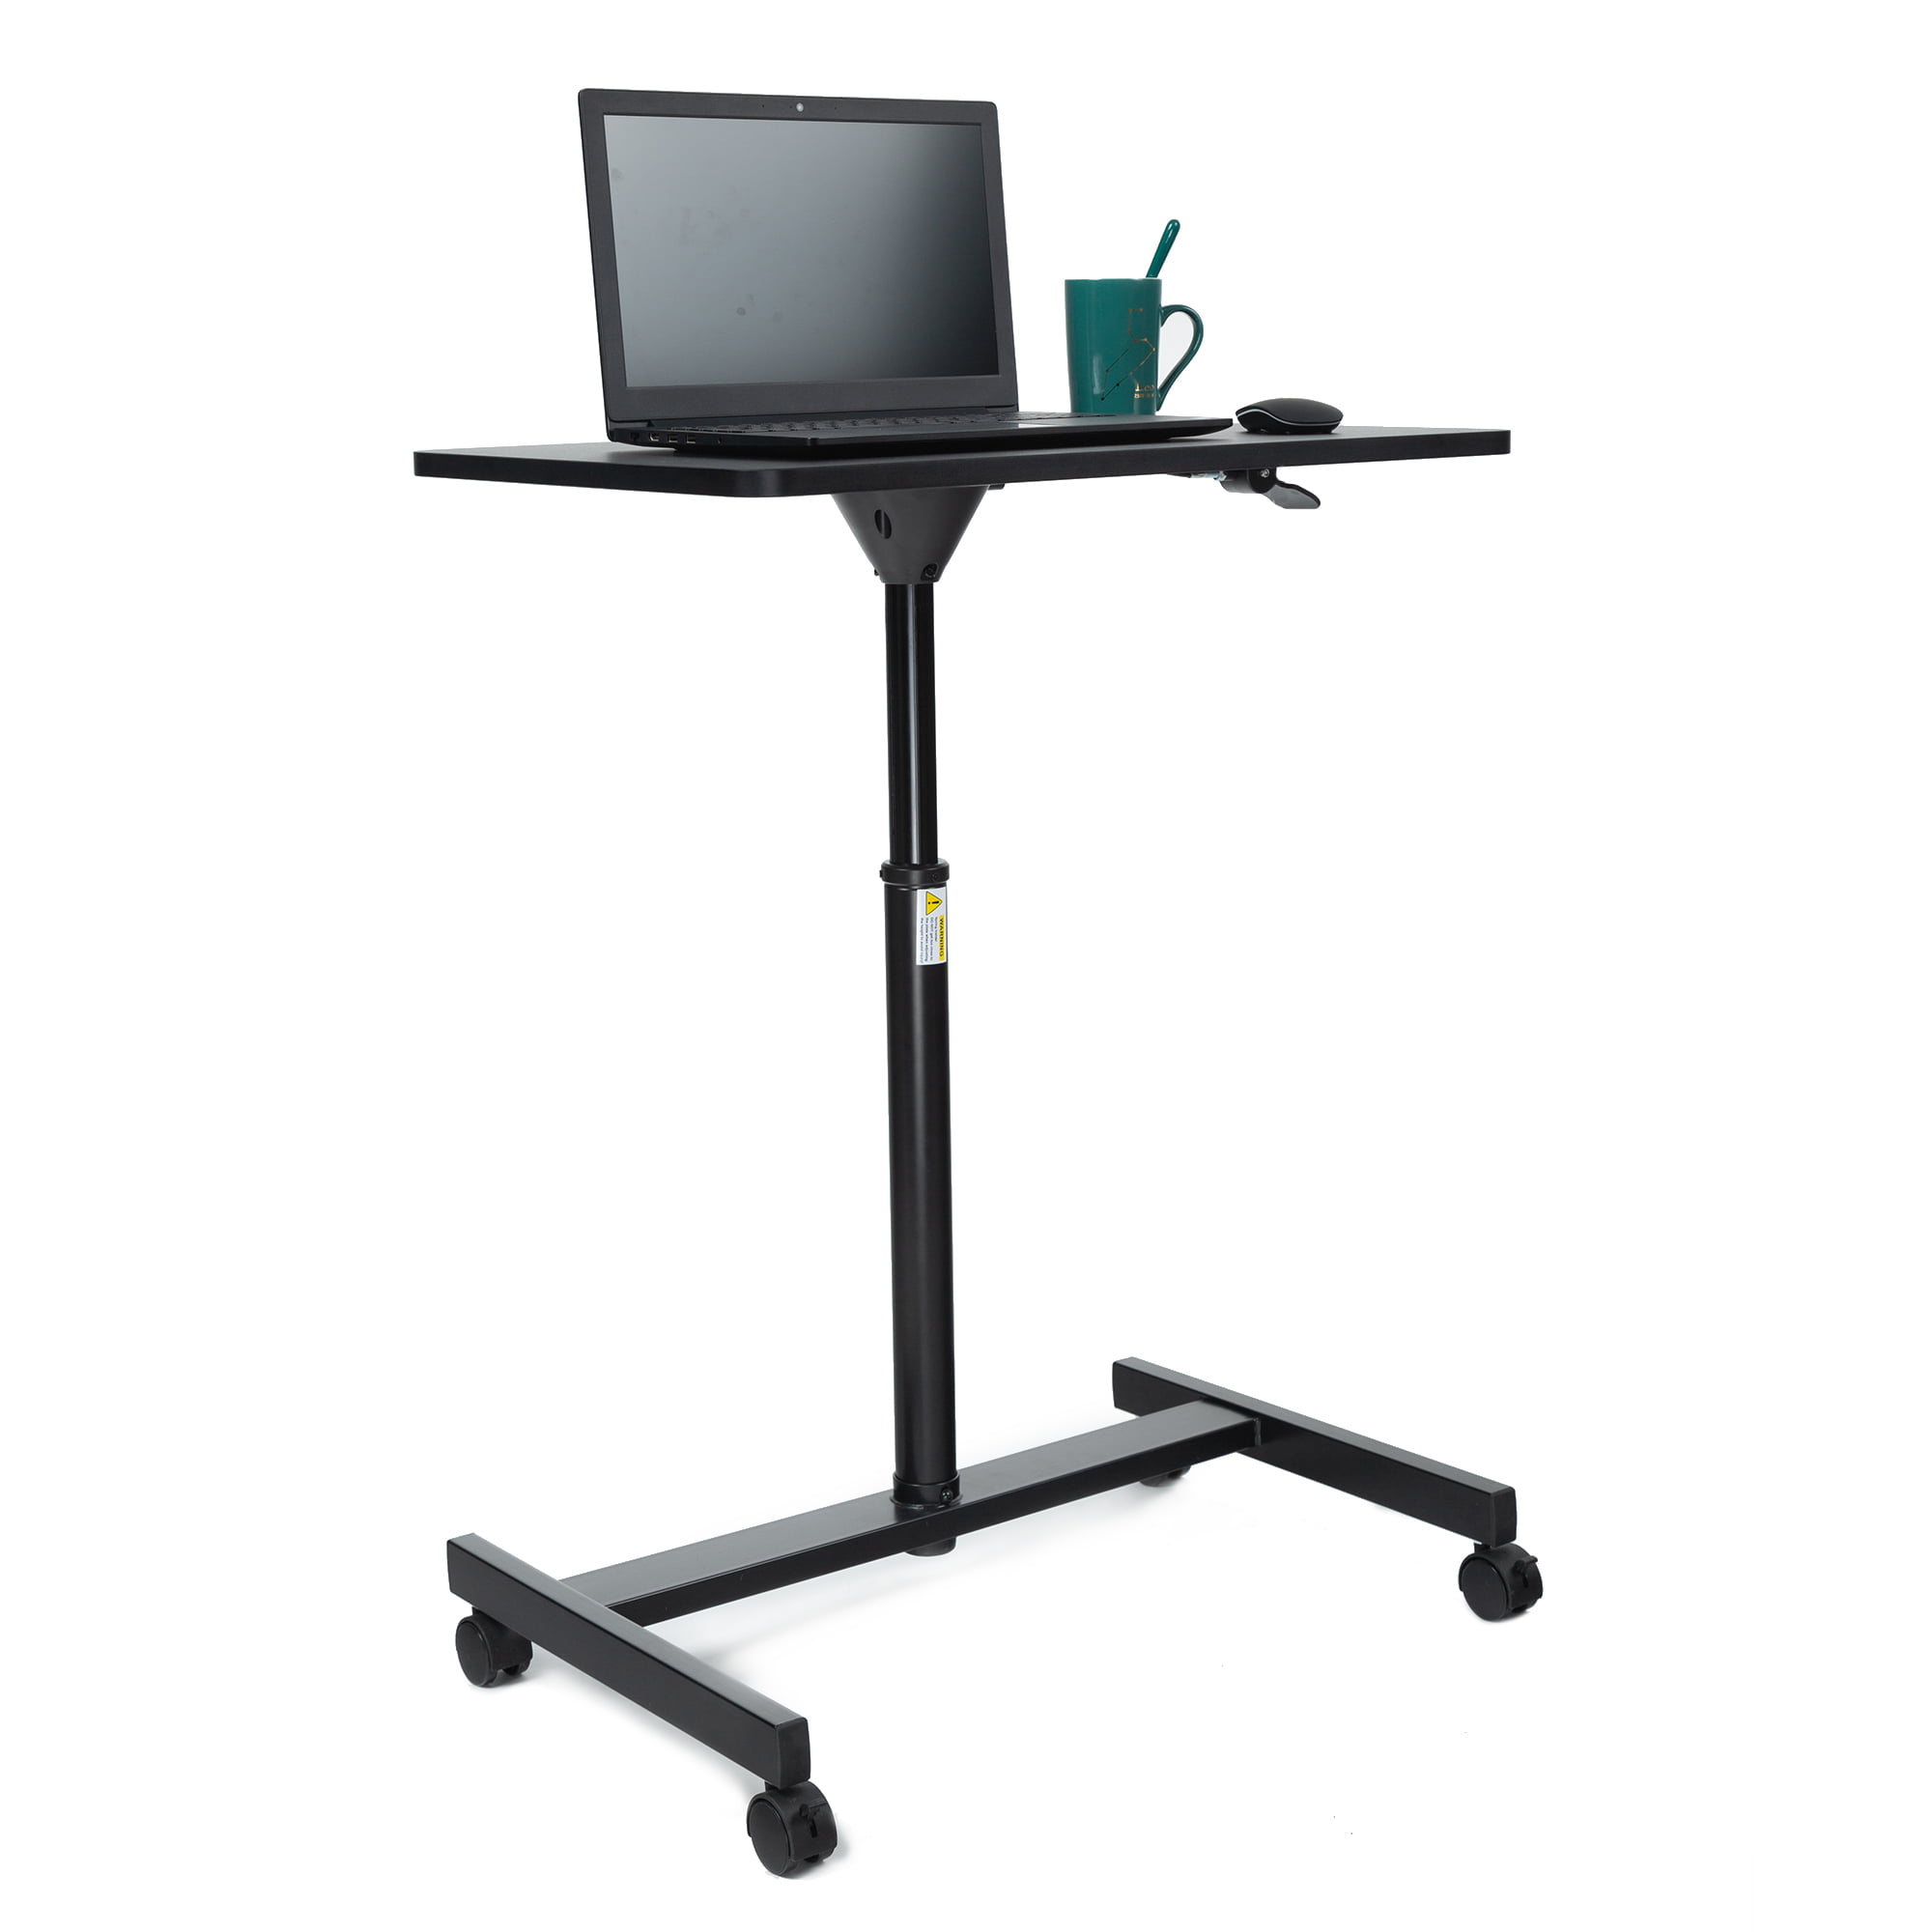 Mobile Sit-Stand Desk Adjustable Height Laptop Desk Cart Ergonomic Table  Small Standing Desk with Pneumatic Height Adjustment, Black